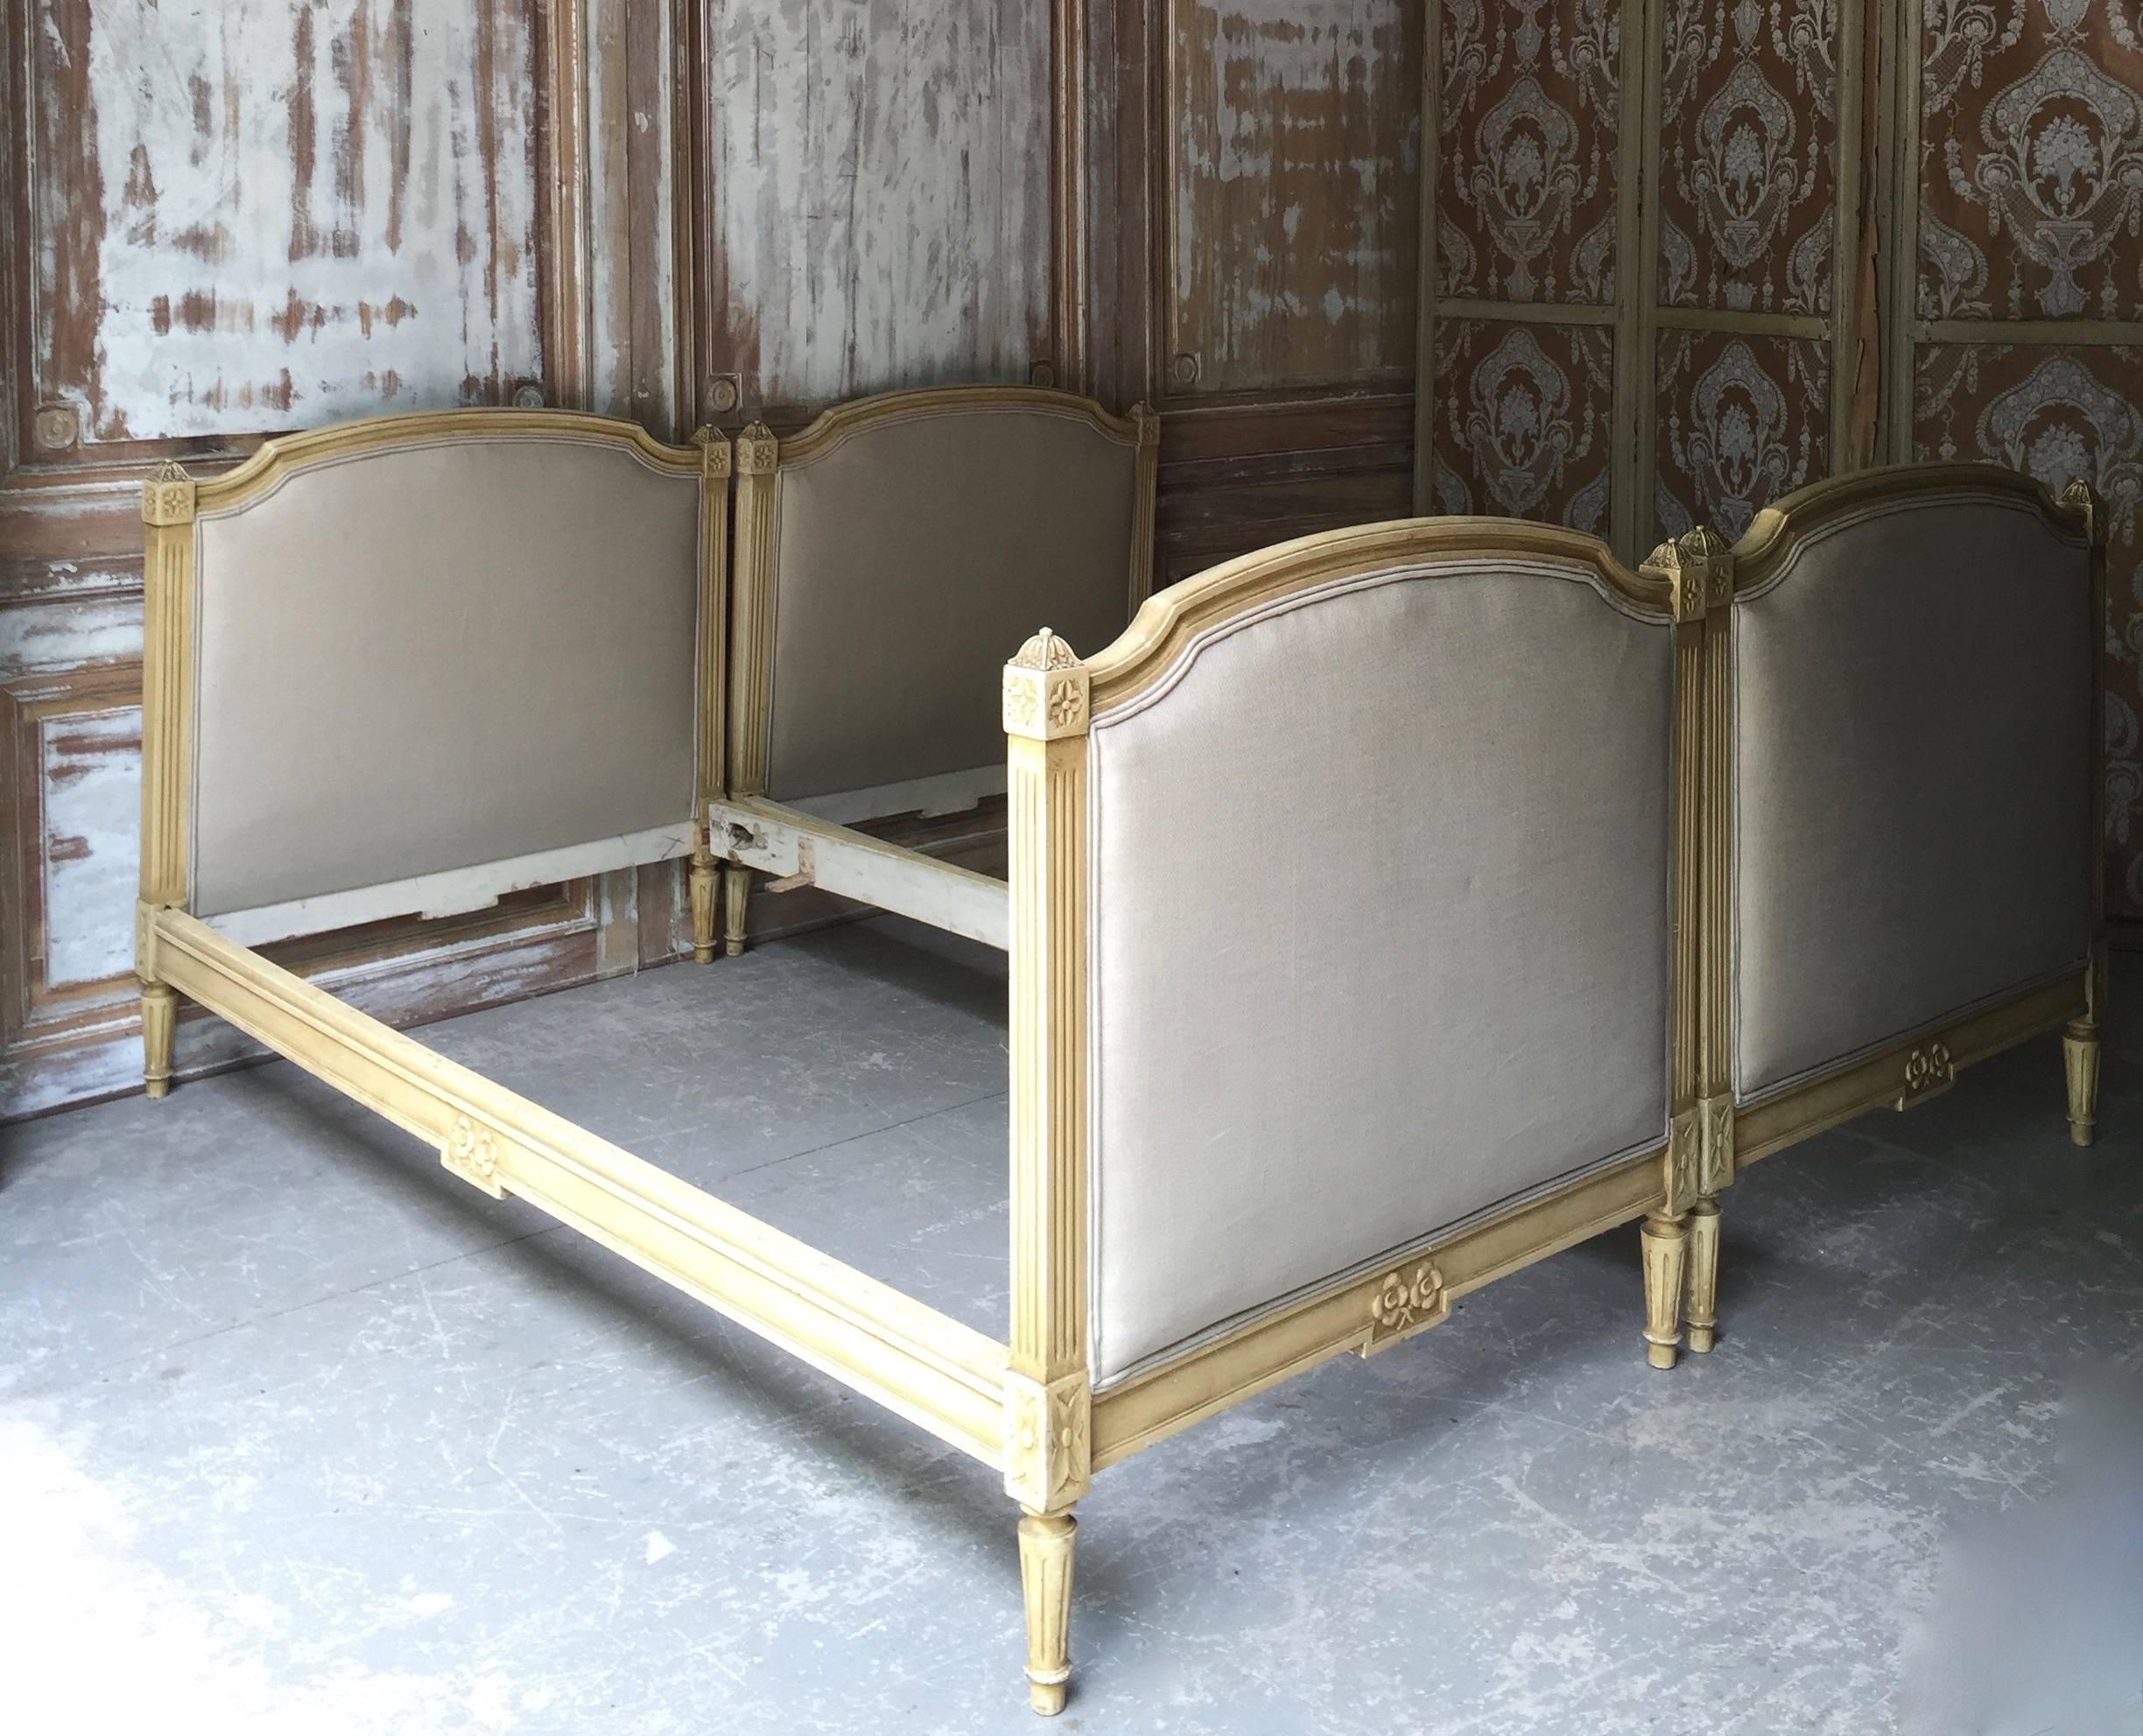 A pair of 19th century French single beds with beautiful details.

Inside measurements:
36.50